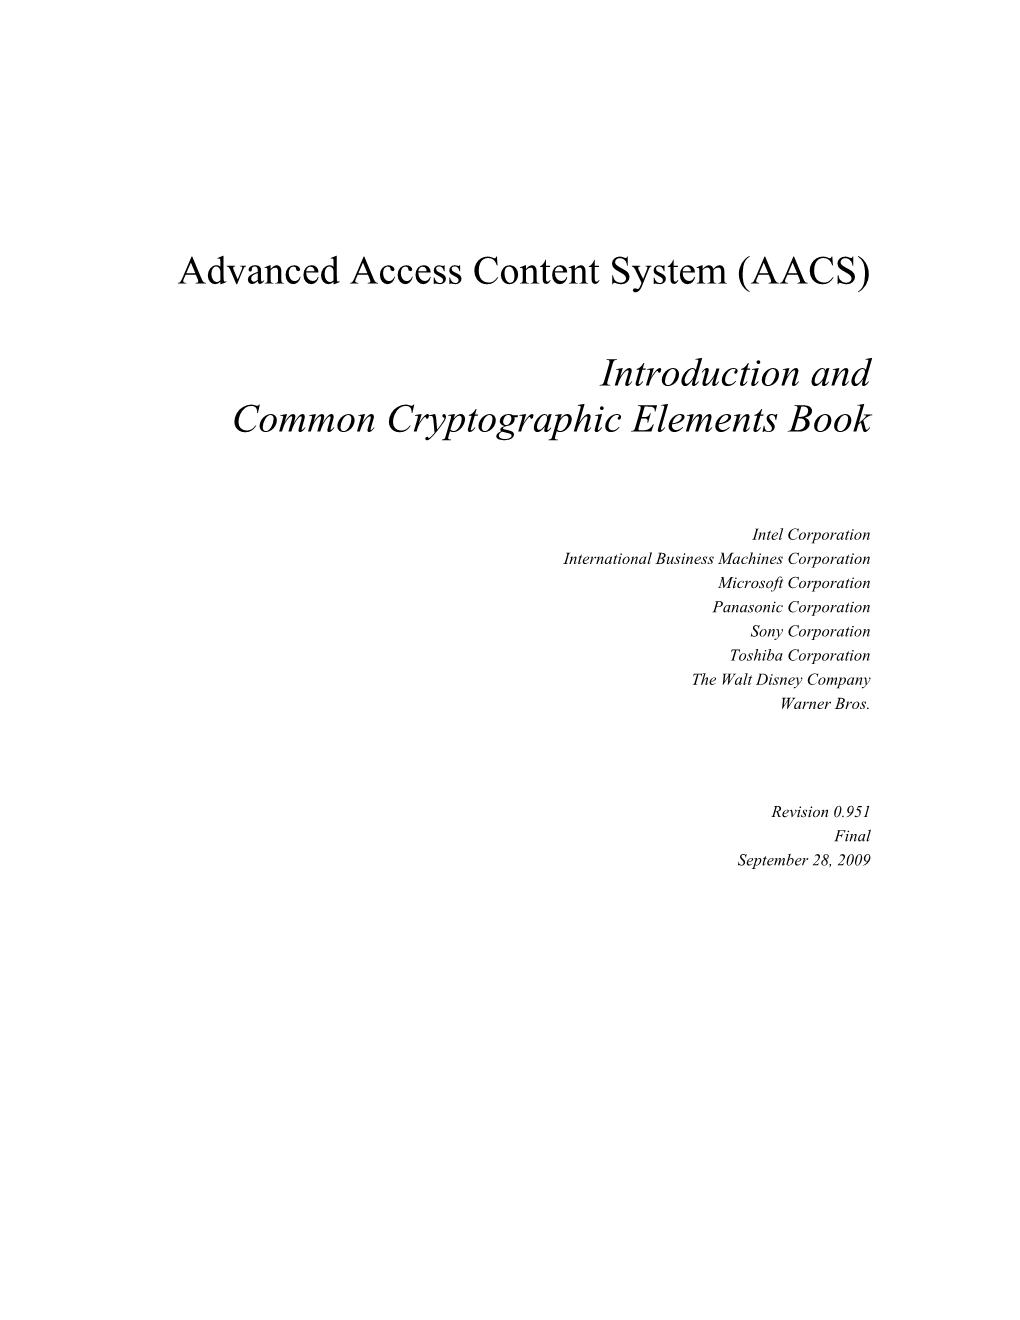 Advanced Access Content System (AACS) Introduction and Common